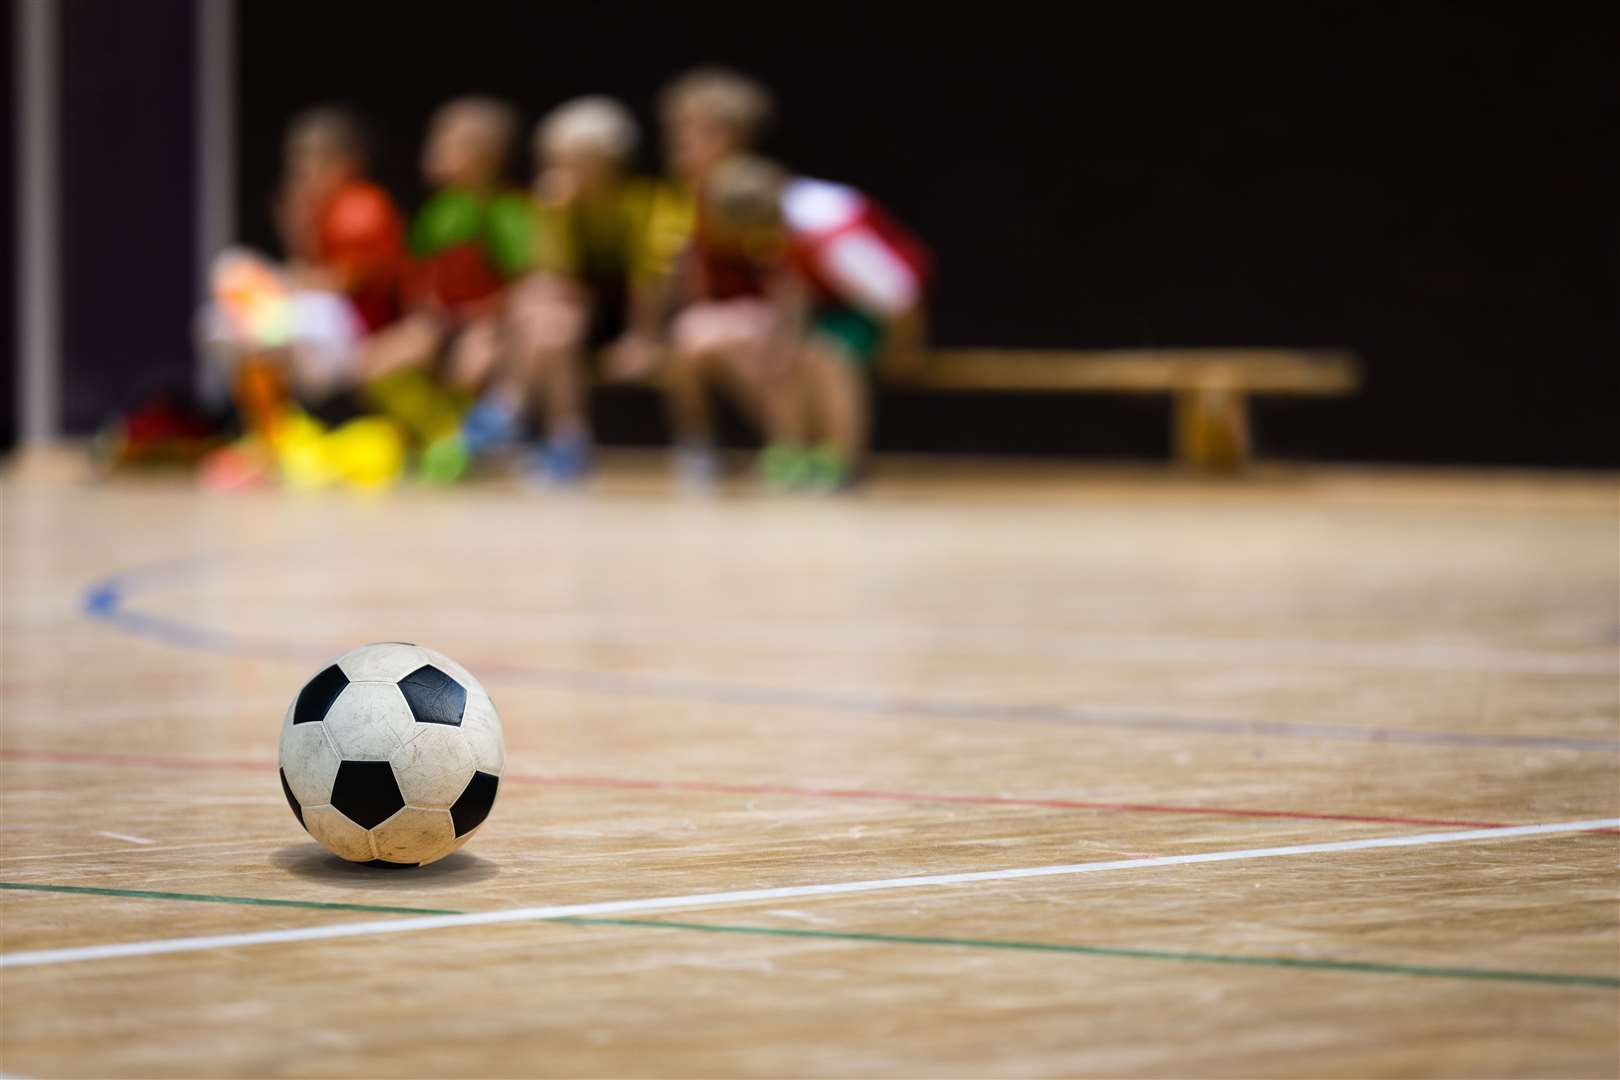 Health officials say when PE lessons, school travel and playtimes stop children's activity levels drop. Image: Stock photo.